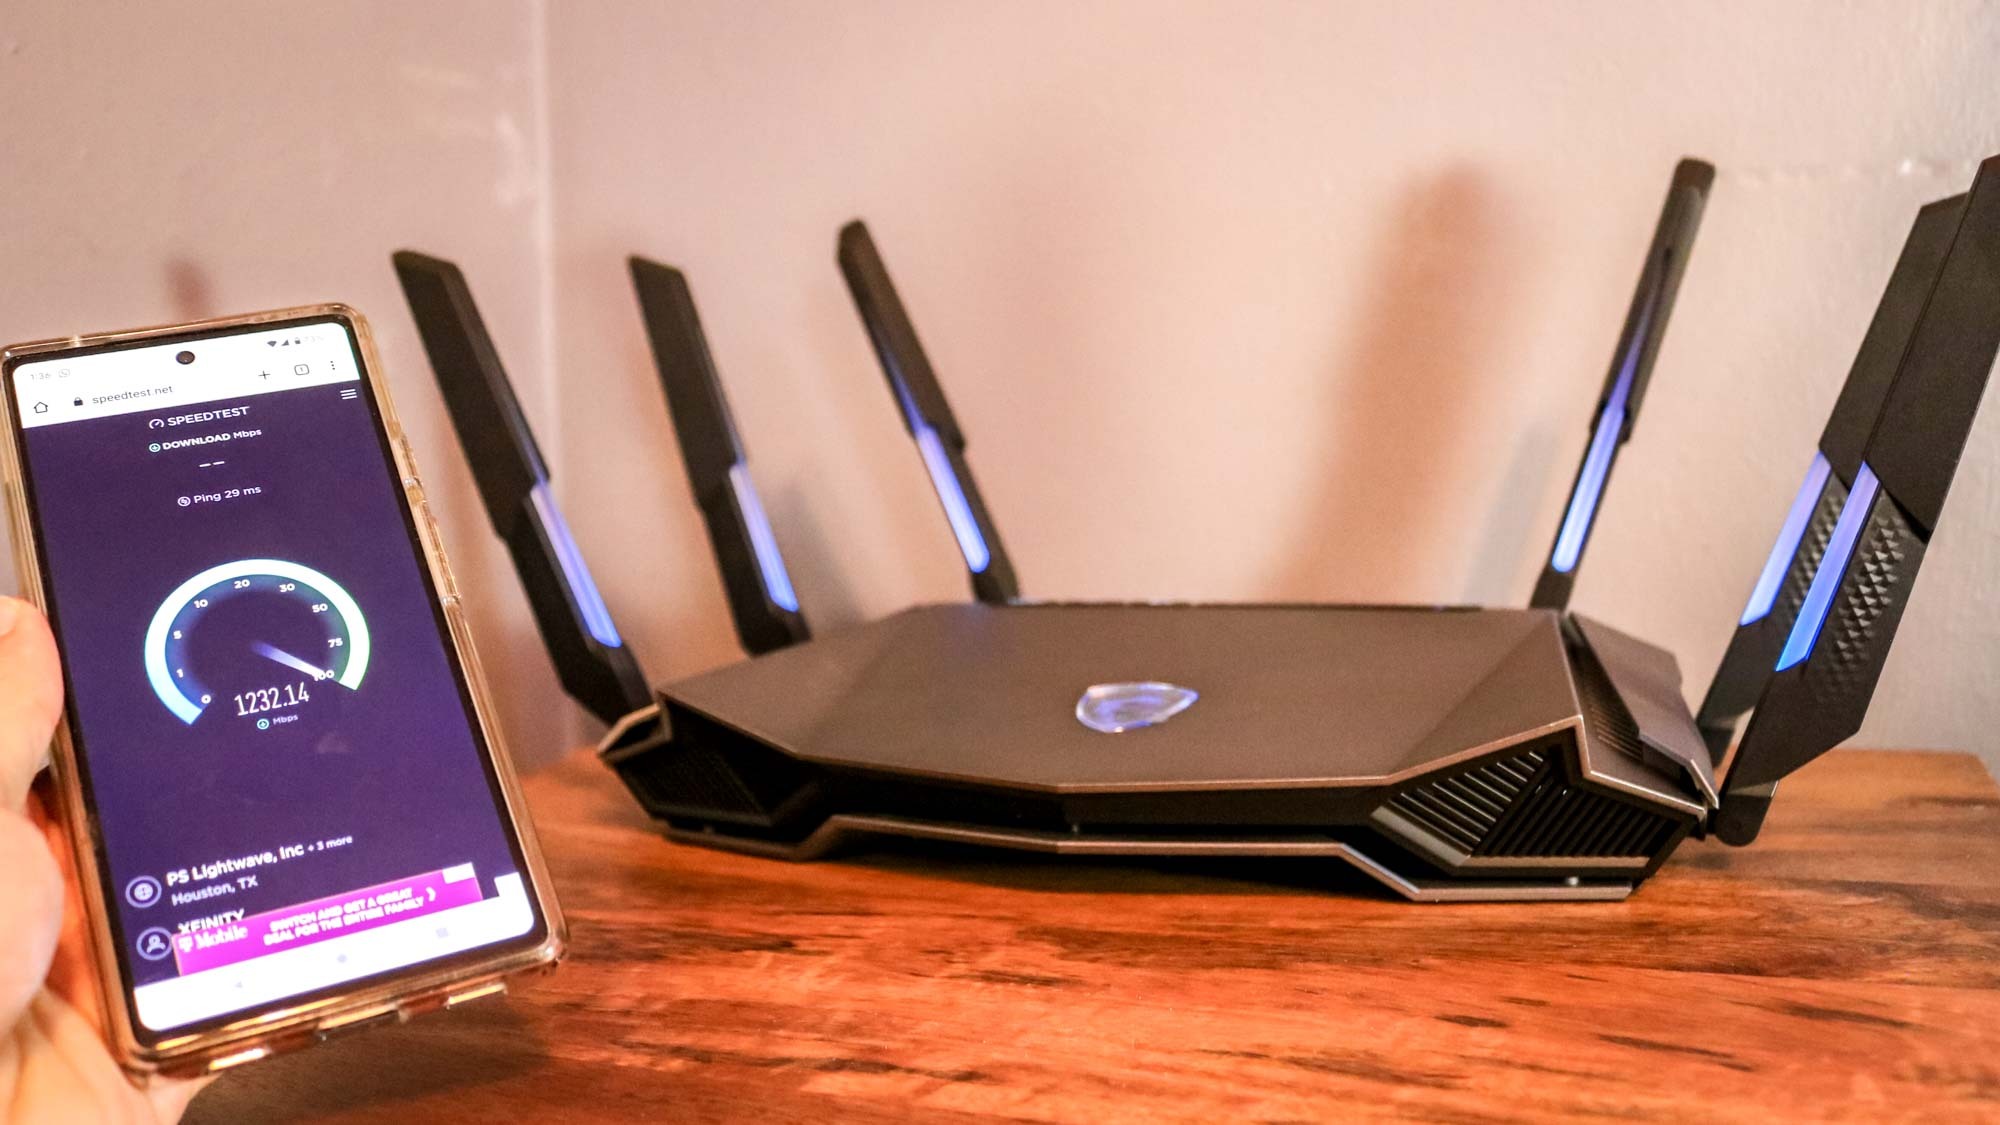 MSI RadiX AXE6600 Wireless Router Review